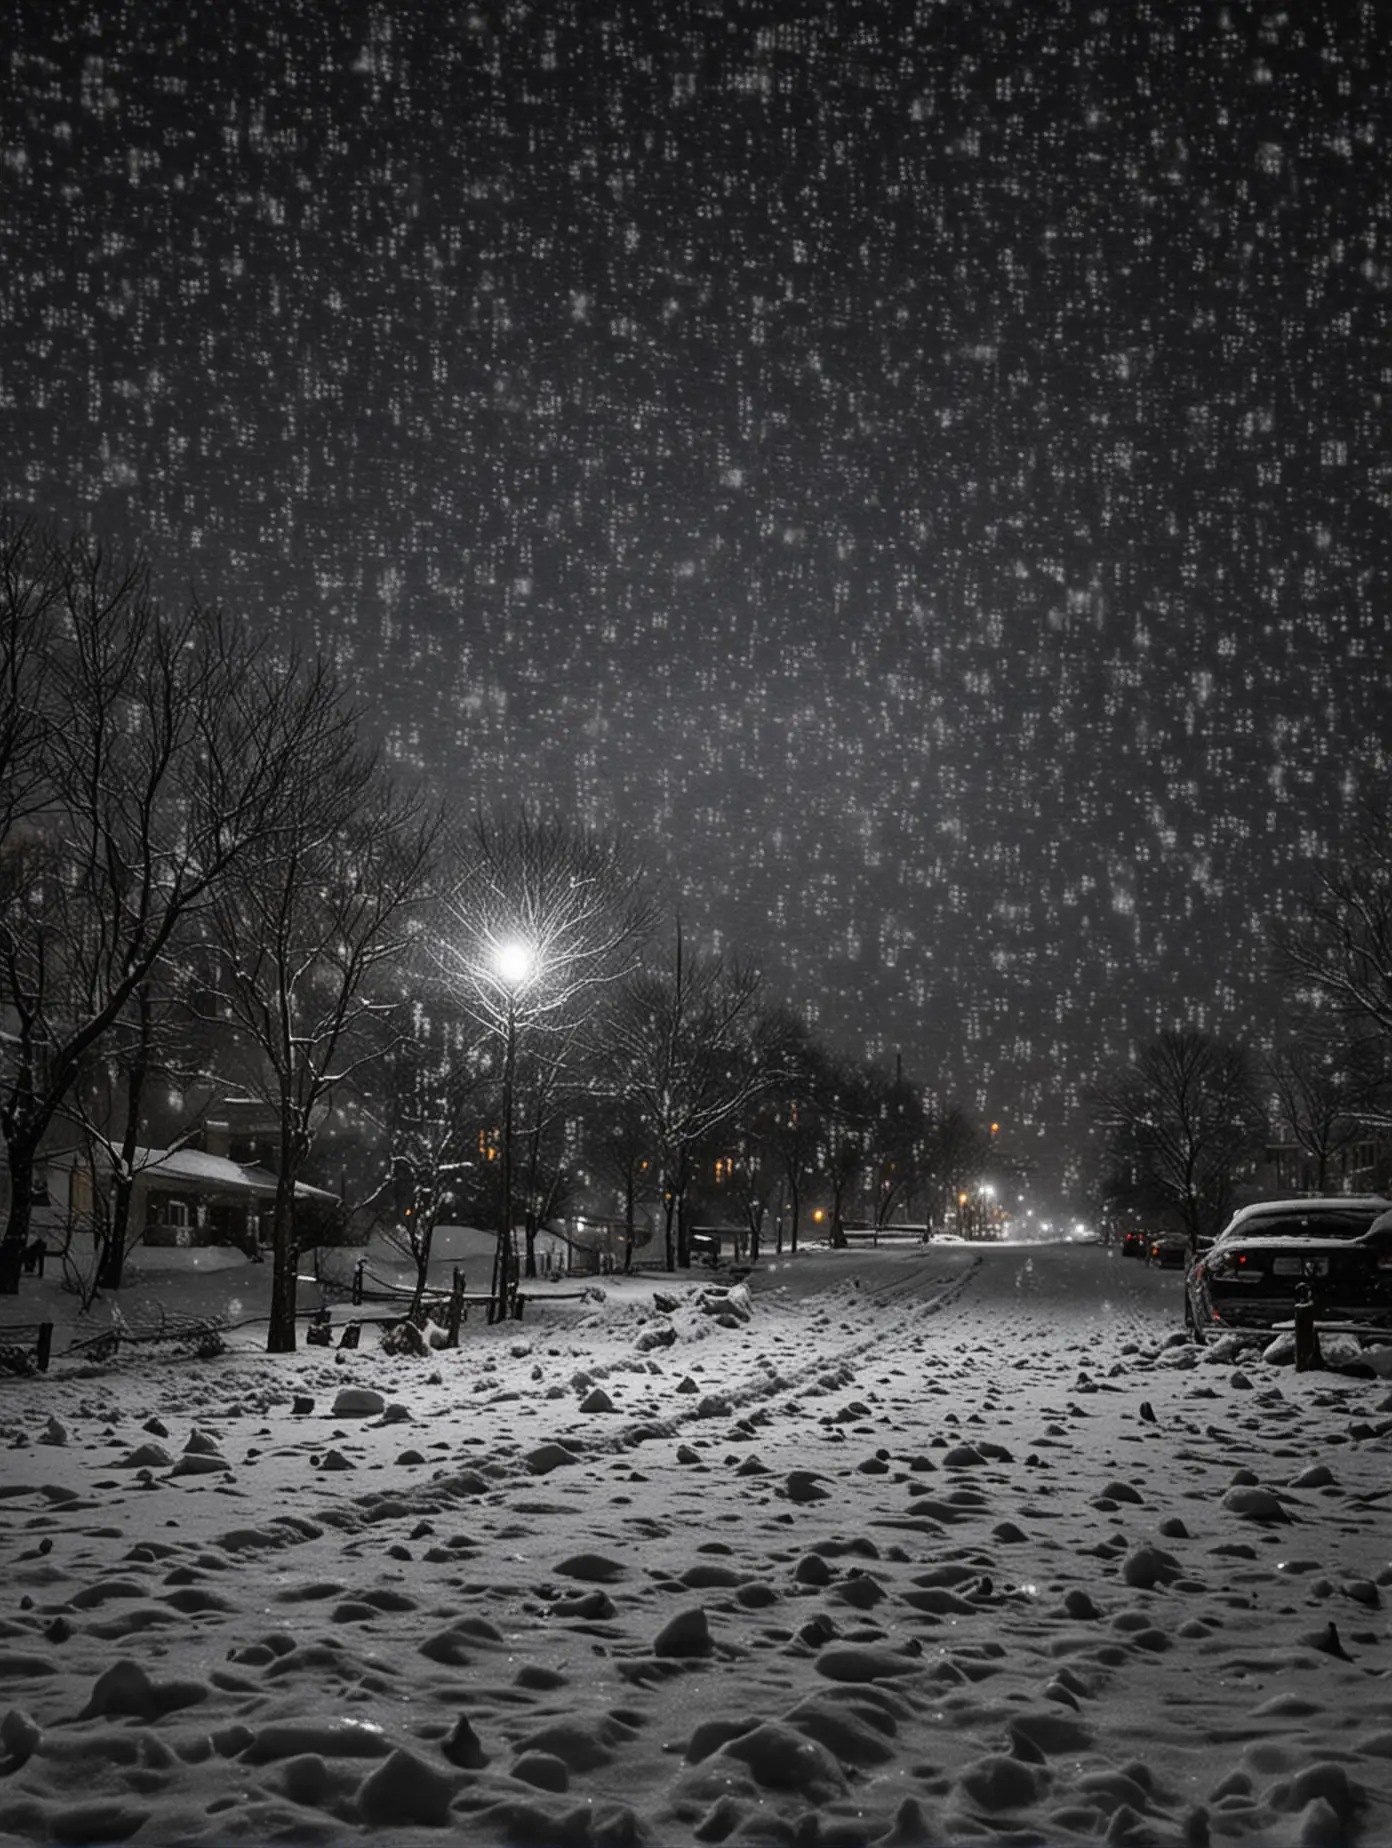 Snow Flurries Night Scene Tranquil Winter Evening with Falling Snow